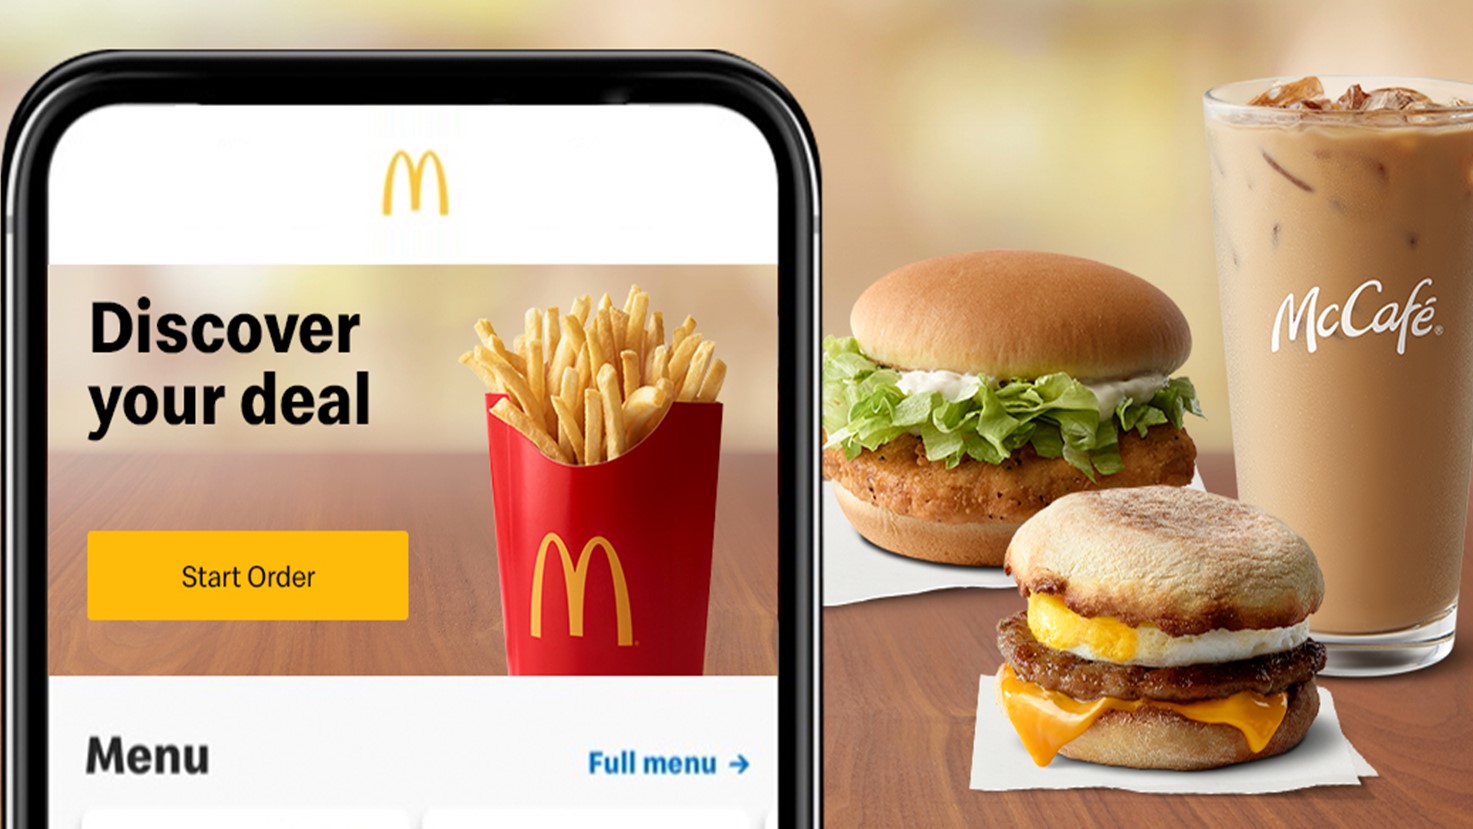 So, Does McDonalds Take Apple Pay?